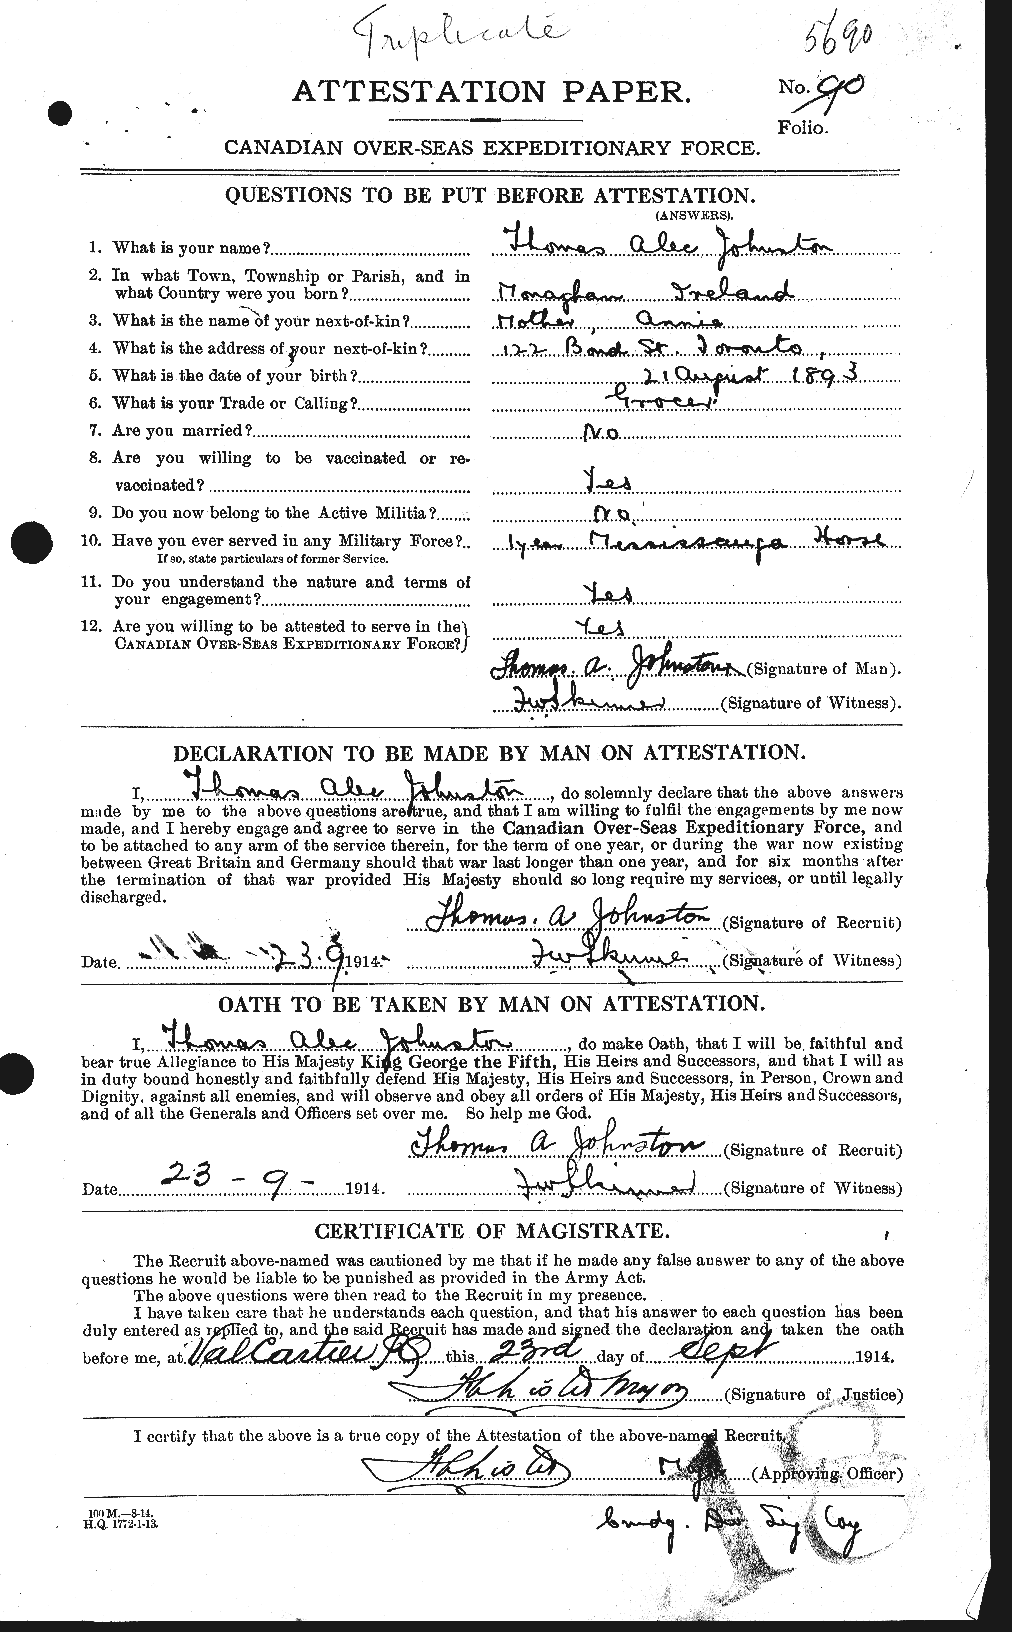 Personnel Records of the First World War - CEF 427148a